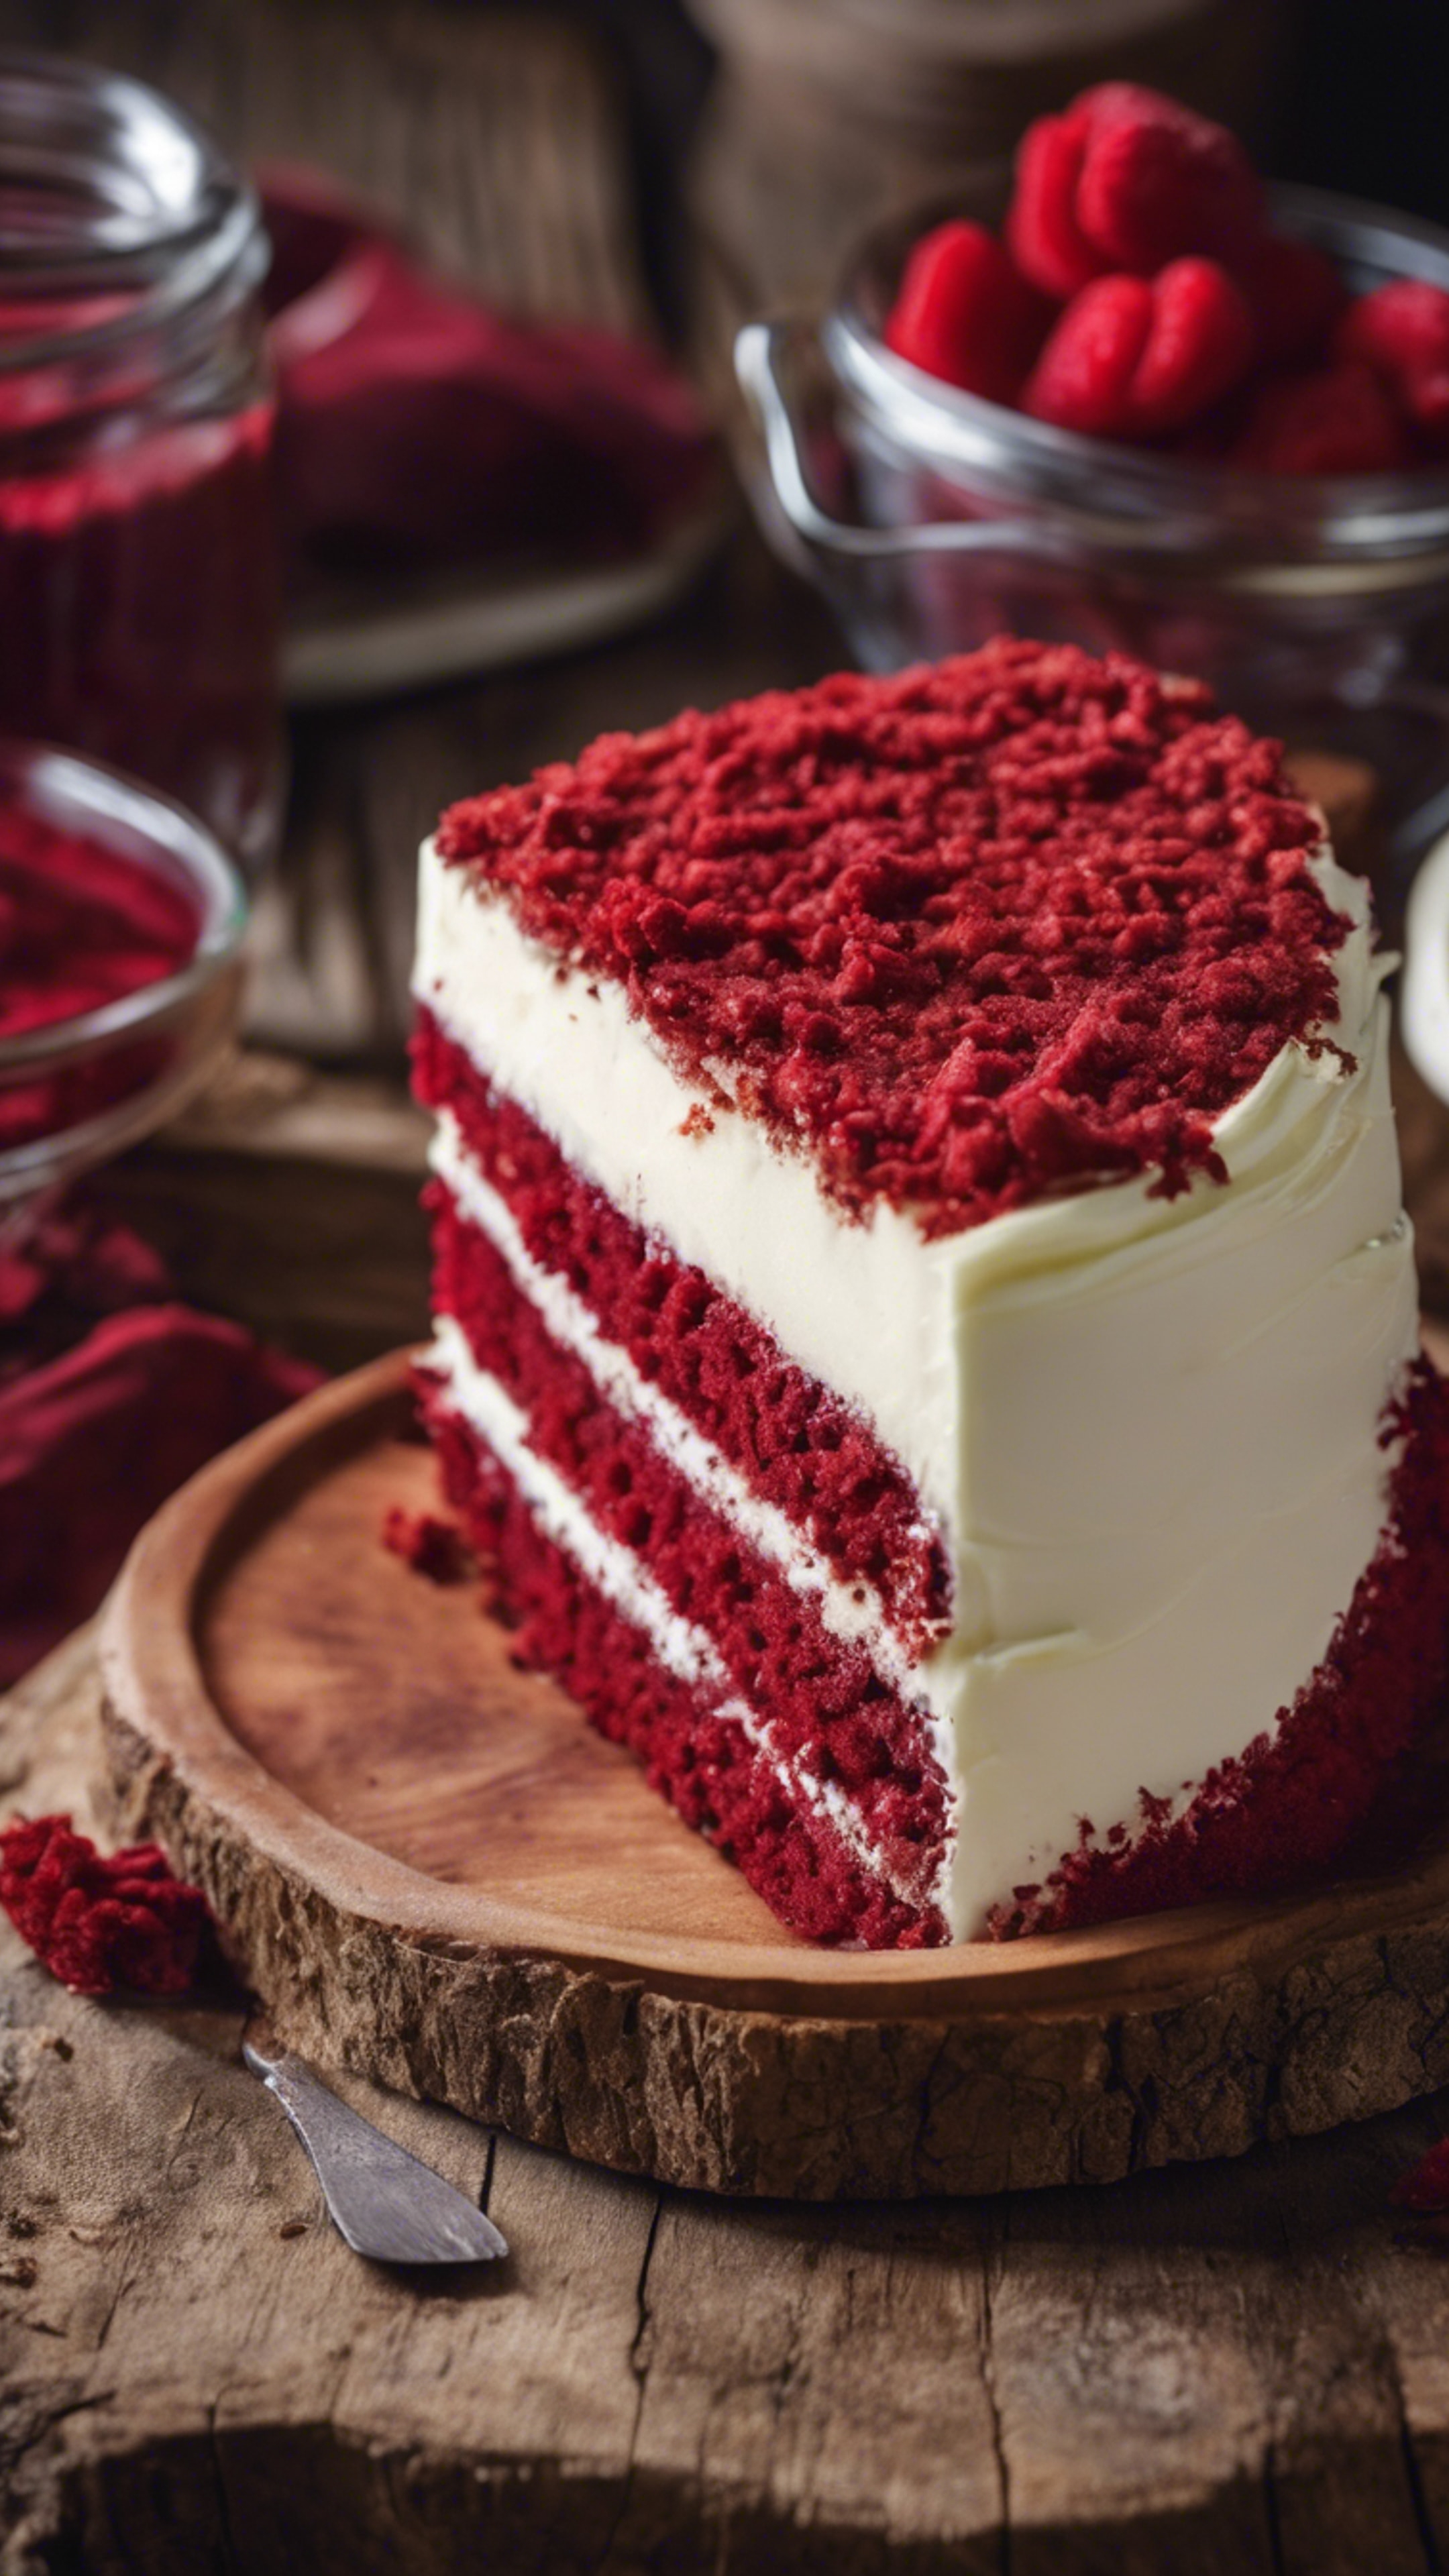 A slice of rich red velvet cake with a layer of cream cheese frosting, placed on a rustic wooden table.壁紙[5b147ad1f433484e86de]